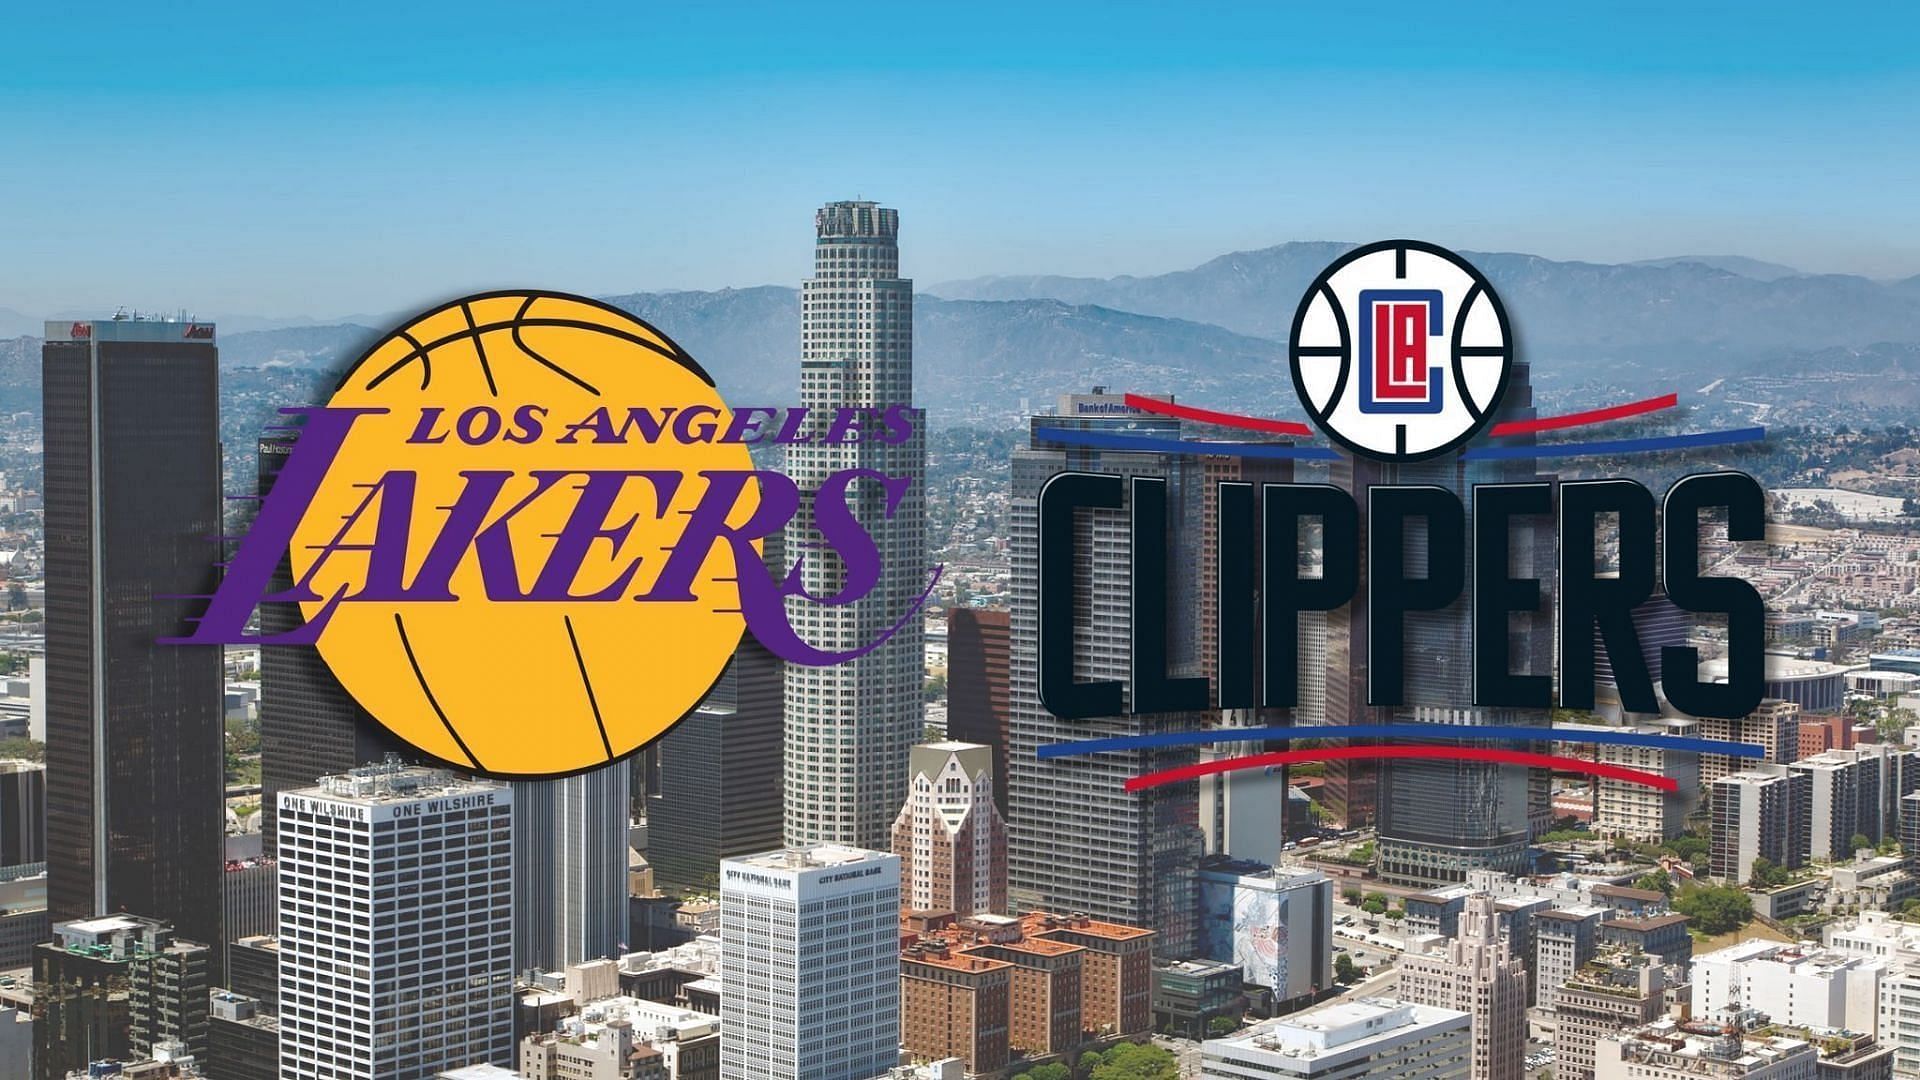 How have the Lakers and Clippers fared against each other in the last 10 games?